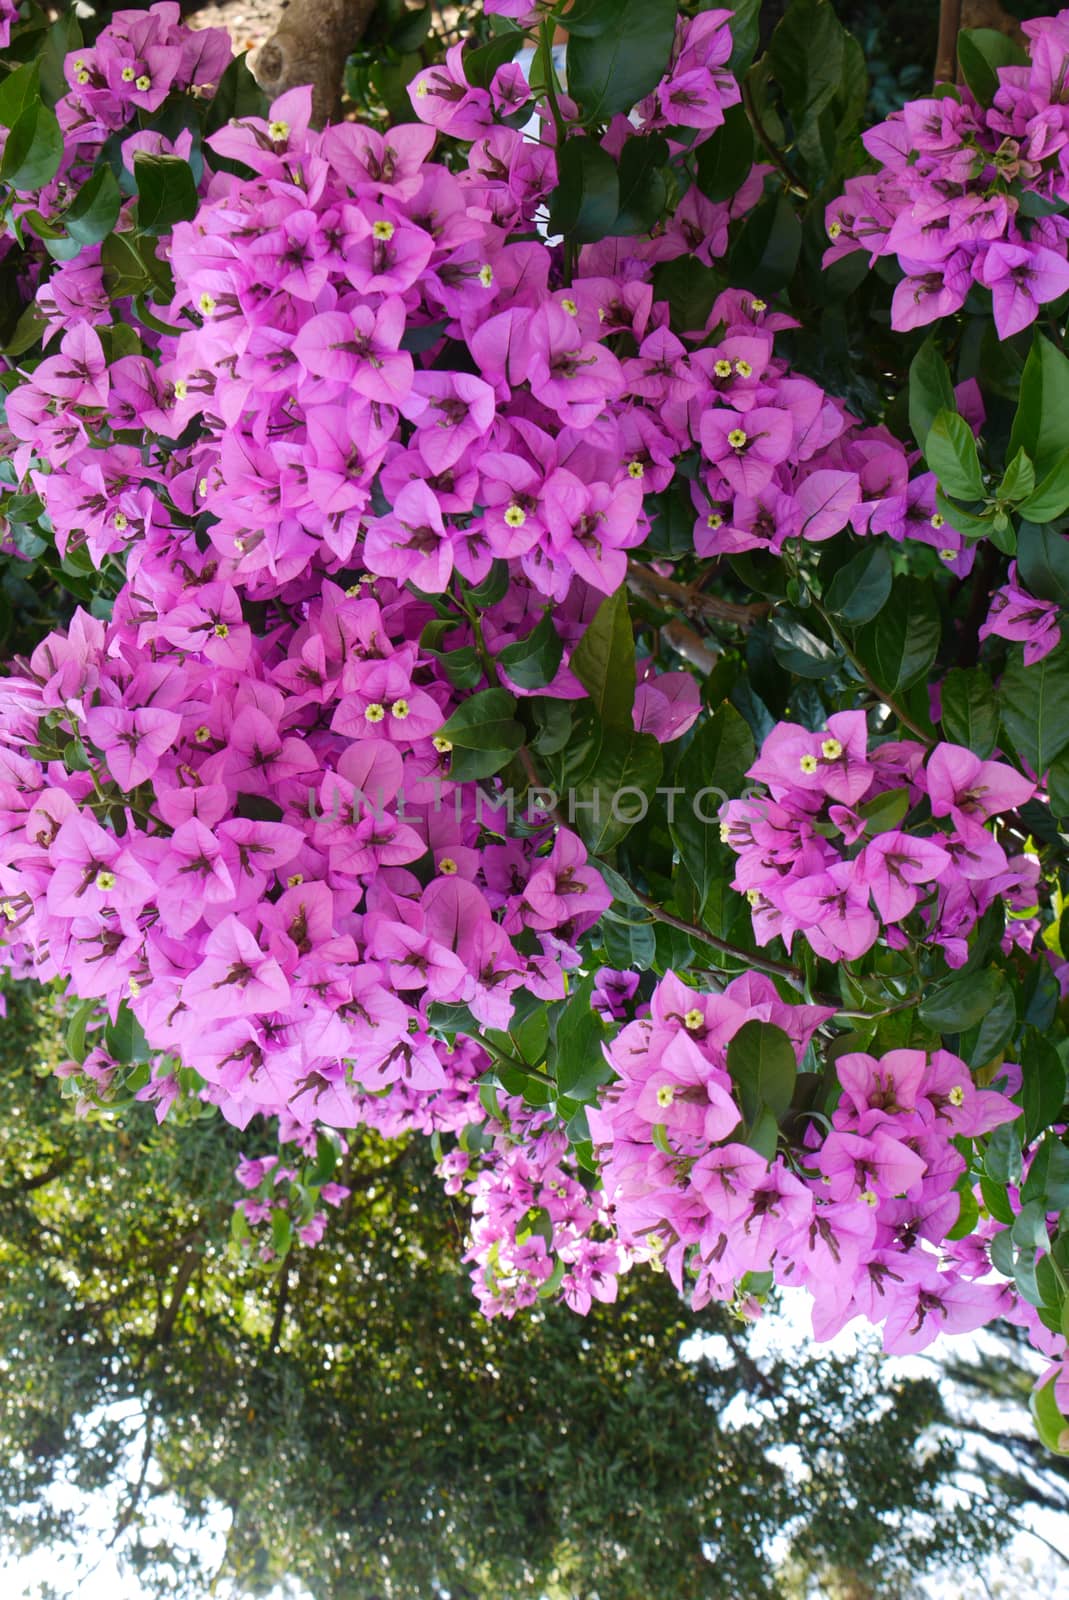 purple flowers with yellow medints on a bush